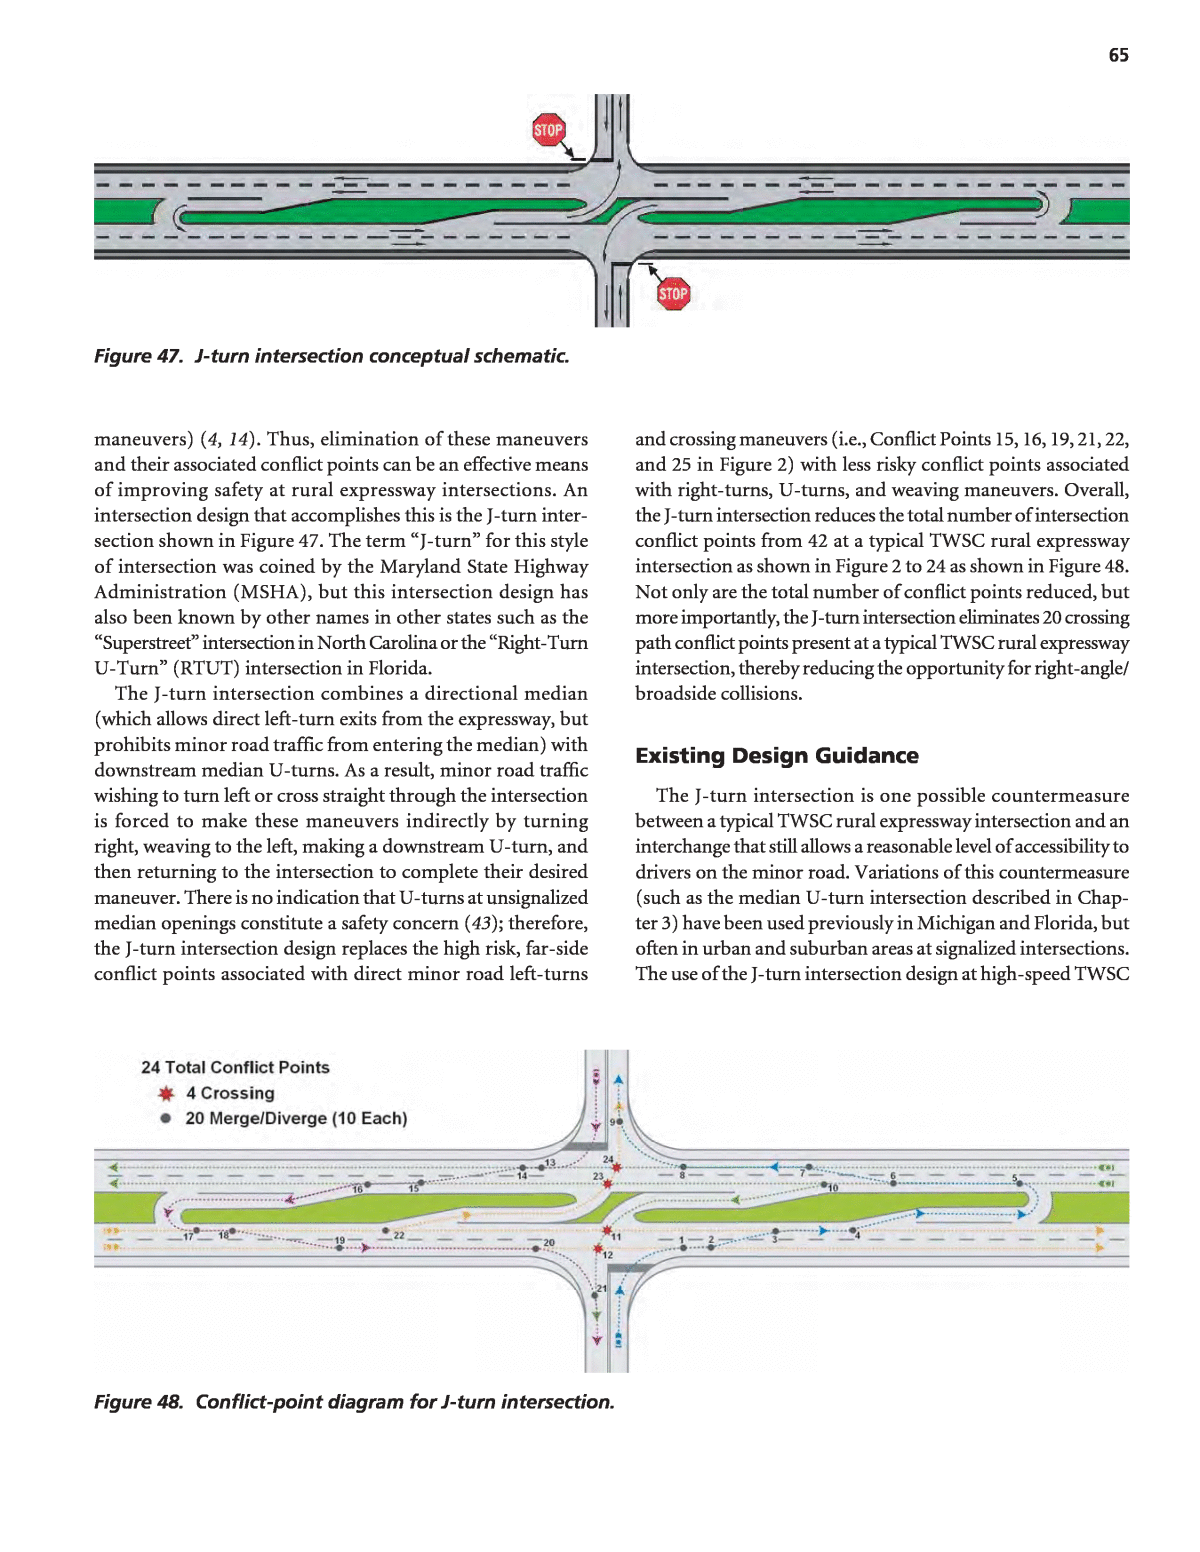 Chapter 4 - Case Studies of Selected Rural Expressway Intersection